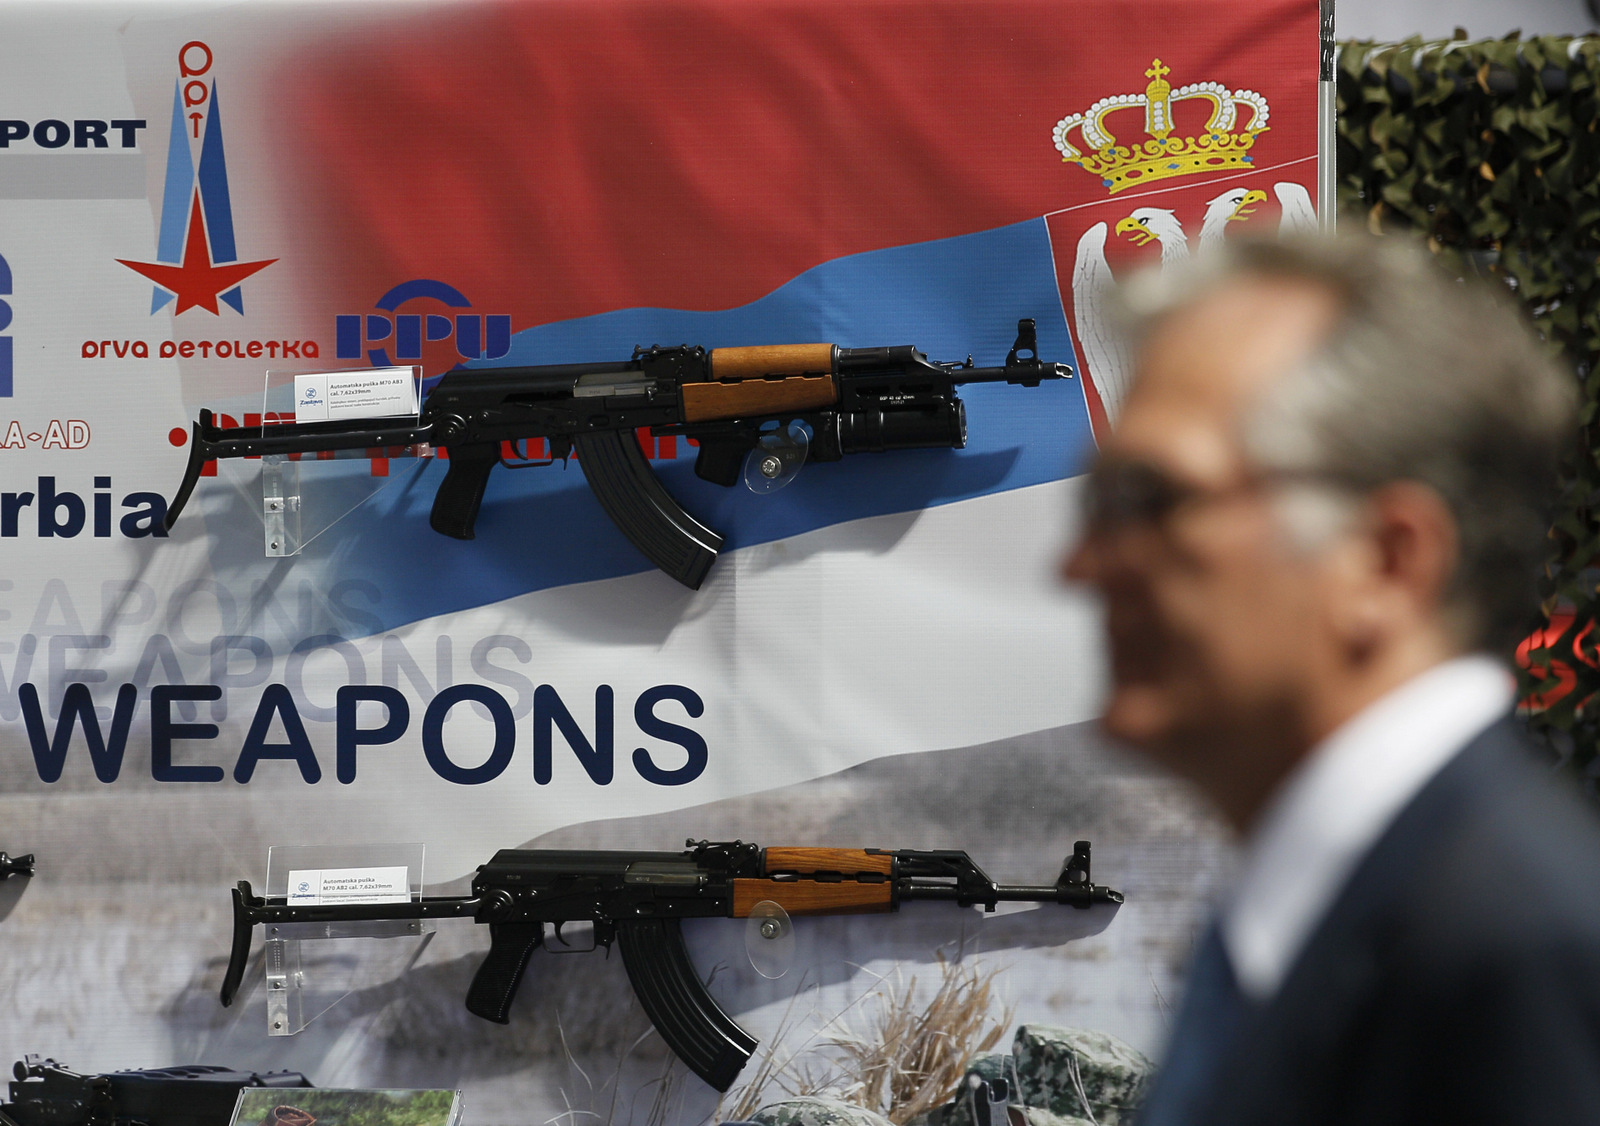 A visitor looks at assault rifles made by the Serbian company Zastava Arms, during a defense fair, in Belgrade, Serbia. (AP/Darko Vojinovic)